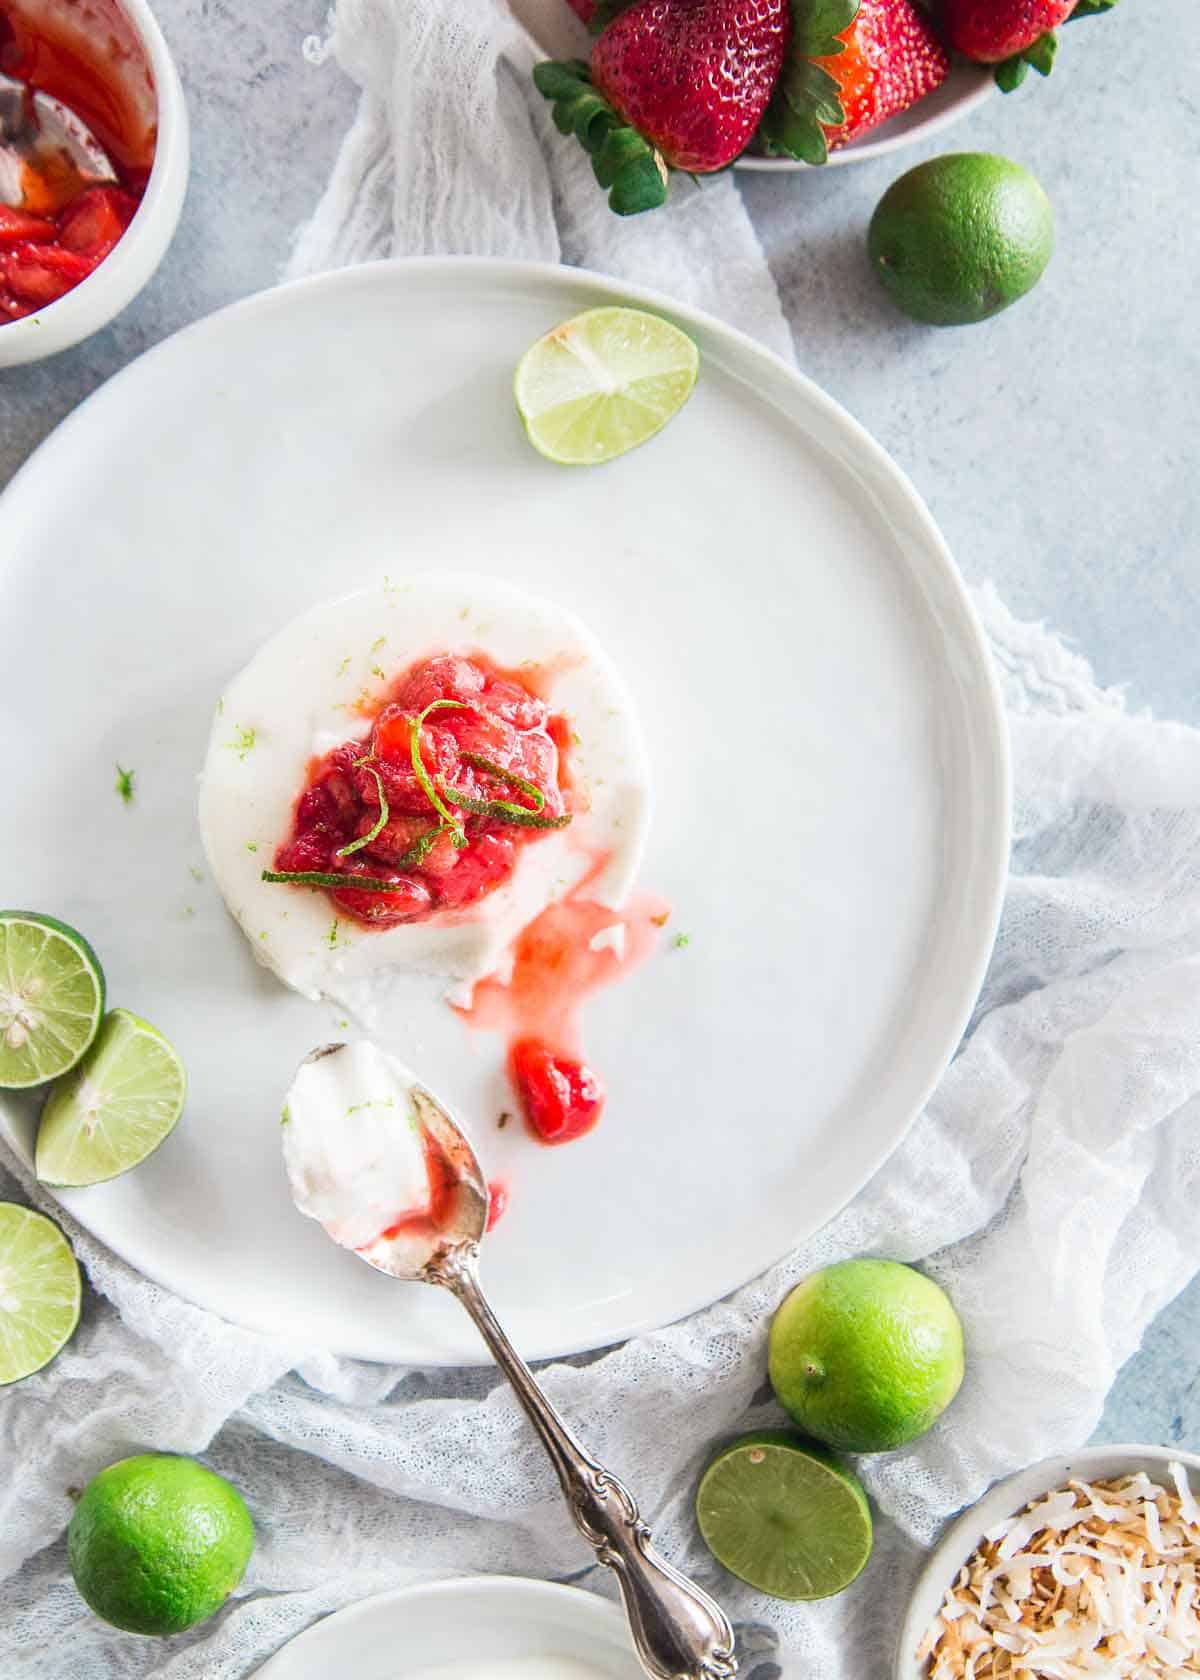 Coconut panna cotta is creamy and delicious with fresh key lime juice and zest and a zingy strawberry key lime topping.